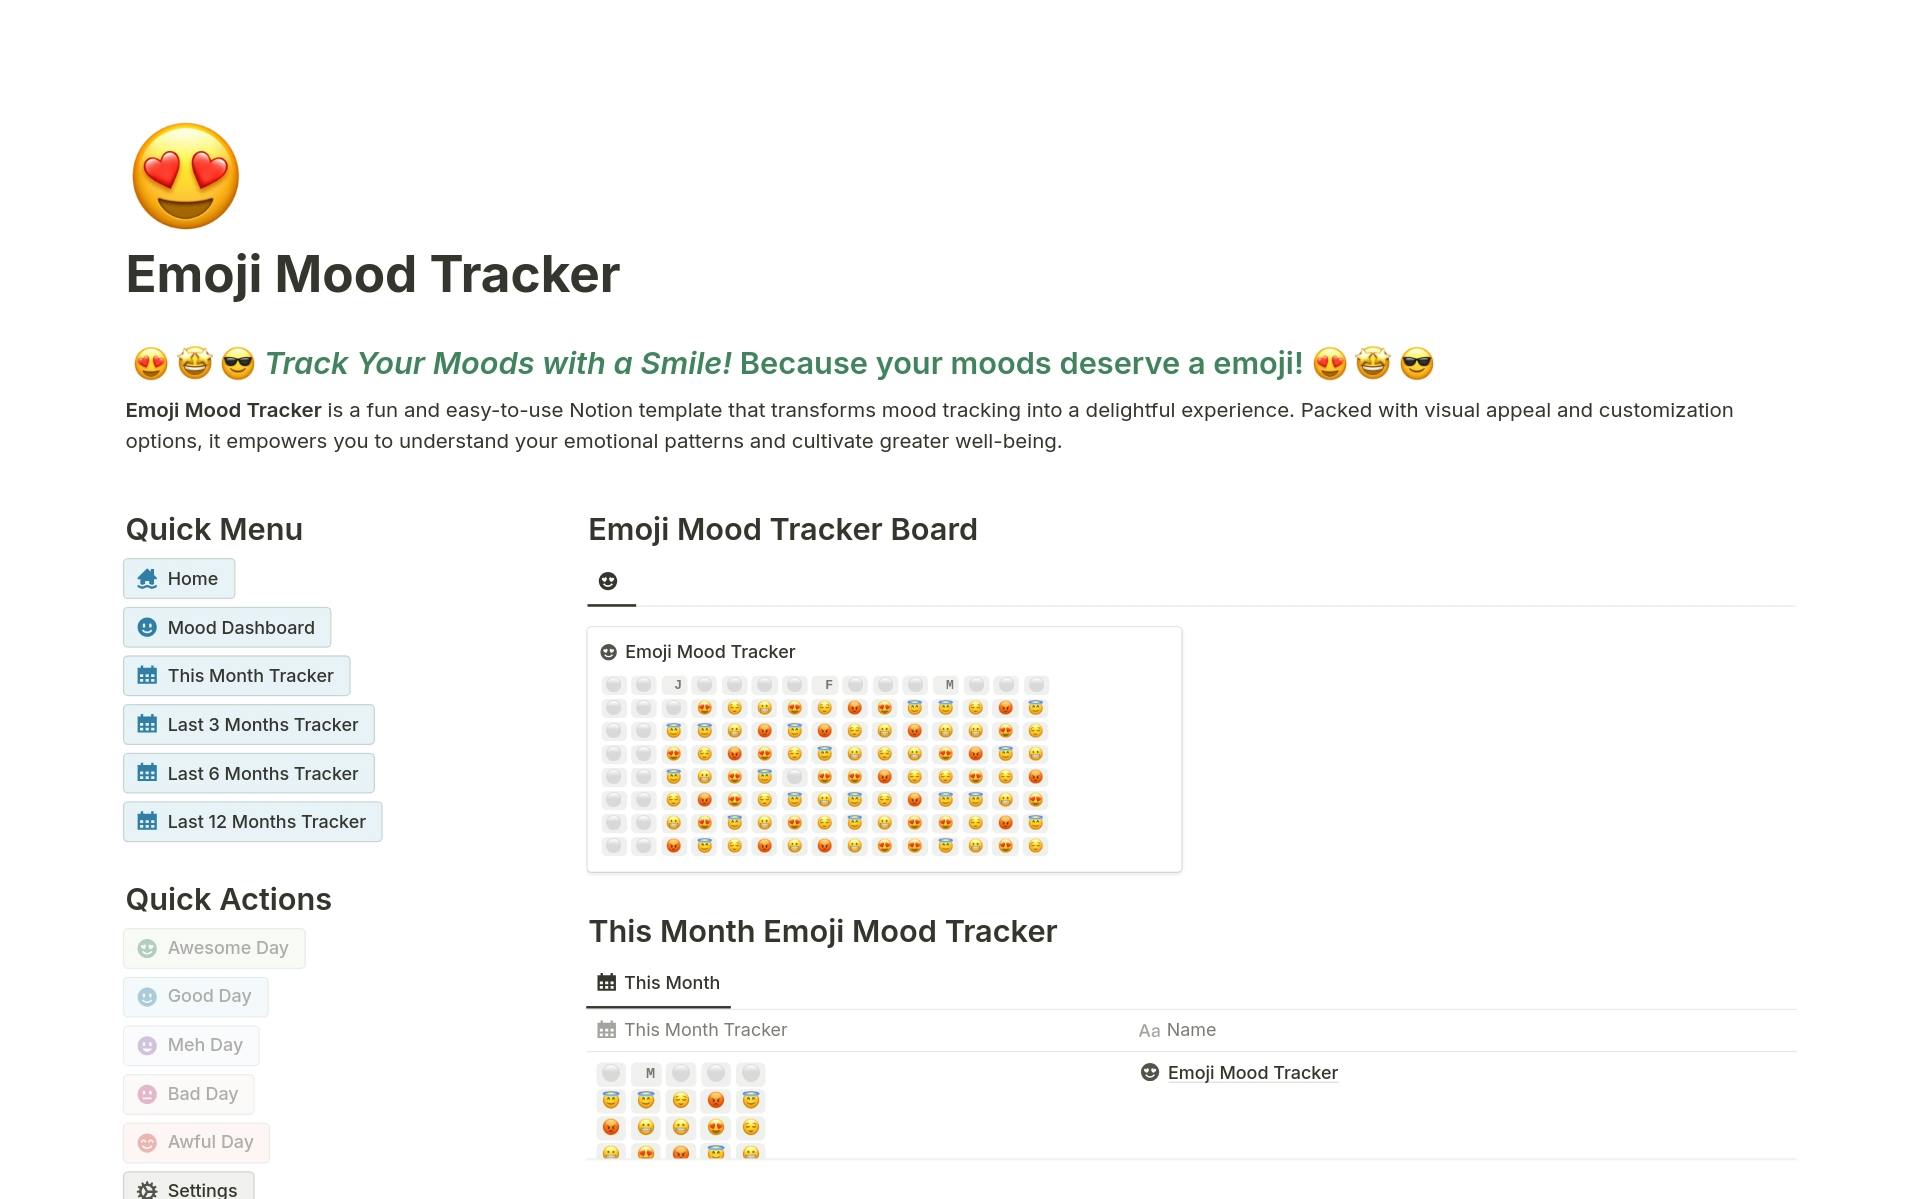  😍 🤩 😎 Track Your Moods with a Smile! Because your moods deserve a emoji! 😍 🤩 😎
Emoji Mood Tracker is a fun and easy-to-use Notion template that transforms mood tracking into a delightful experience. 